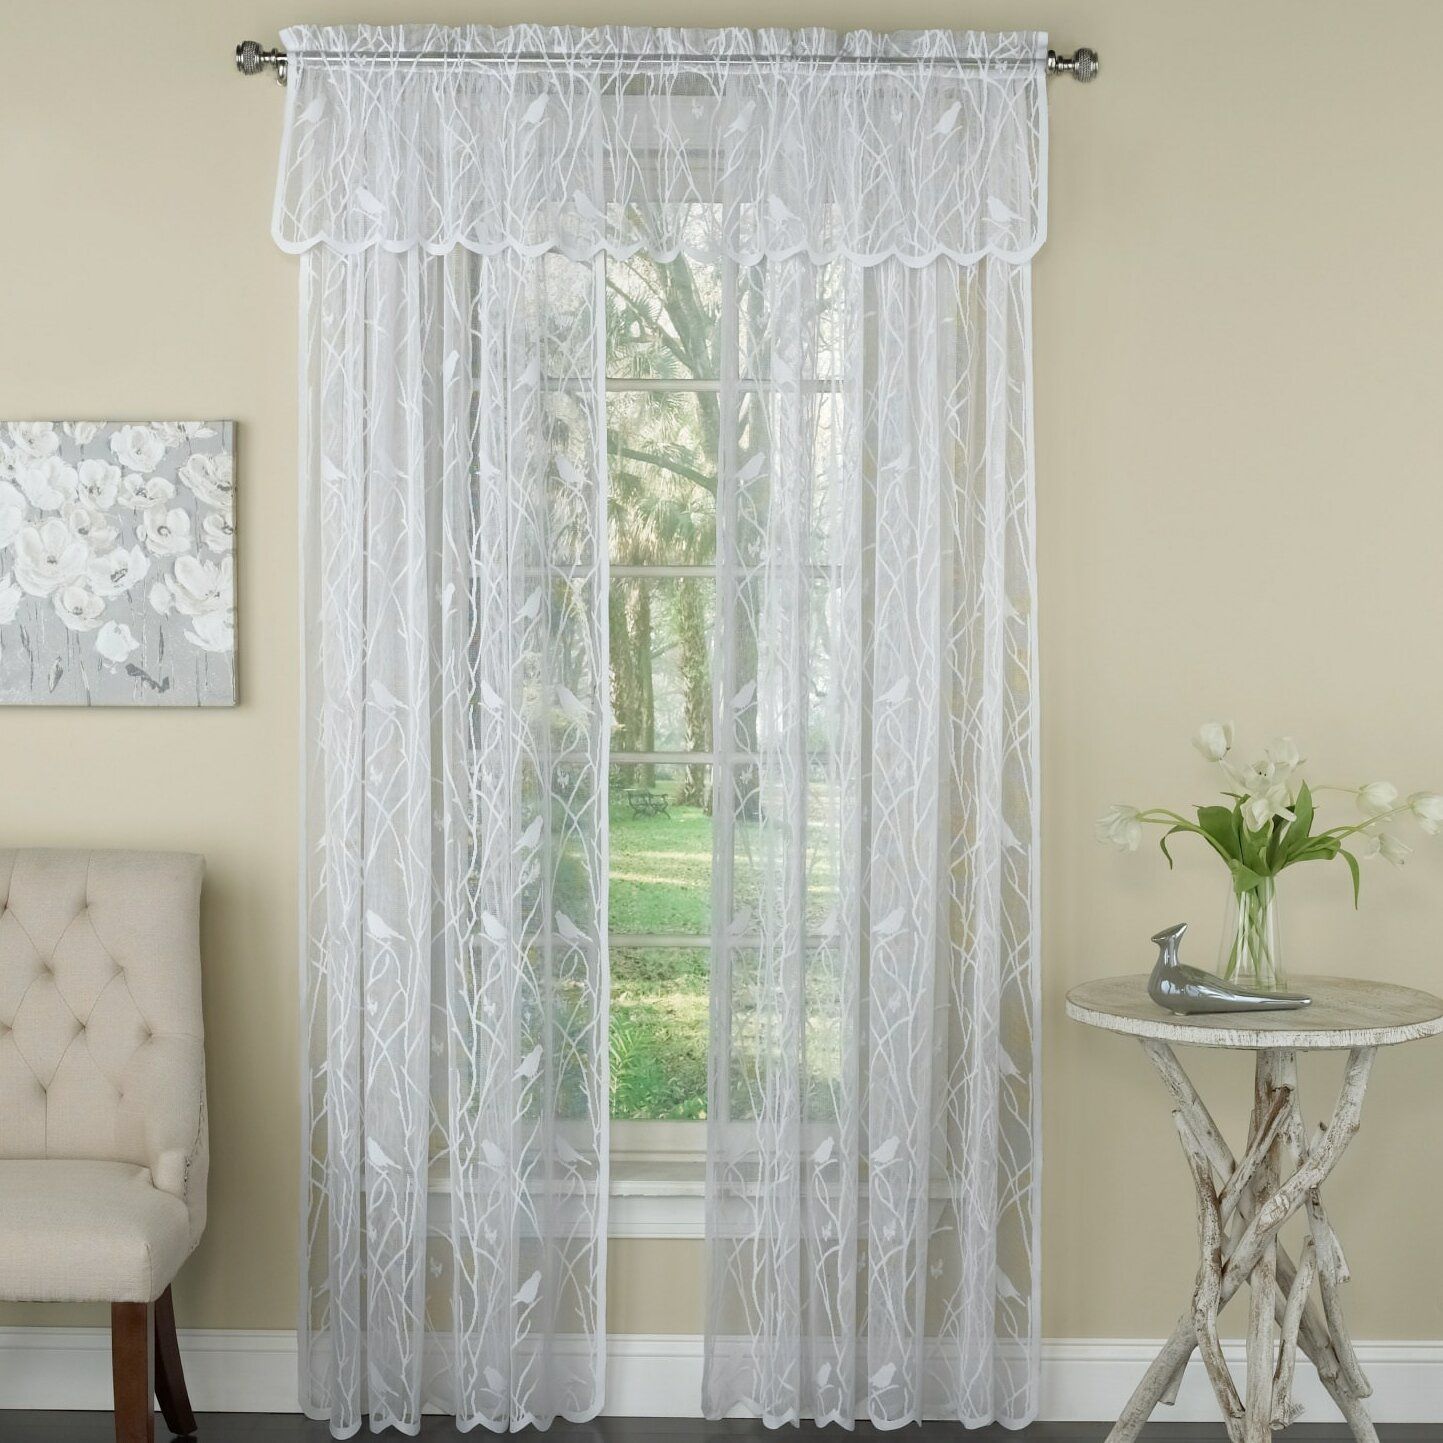 Prevatte Bird Song Lace Tier Pair Nature/floral Semi Sheer Rod Pocket  Single Window Curtain With Tranquility Curtain Tier Pairs (Photo 20 of 20)